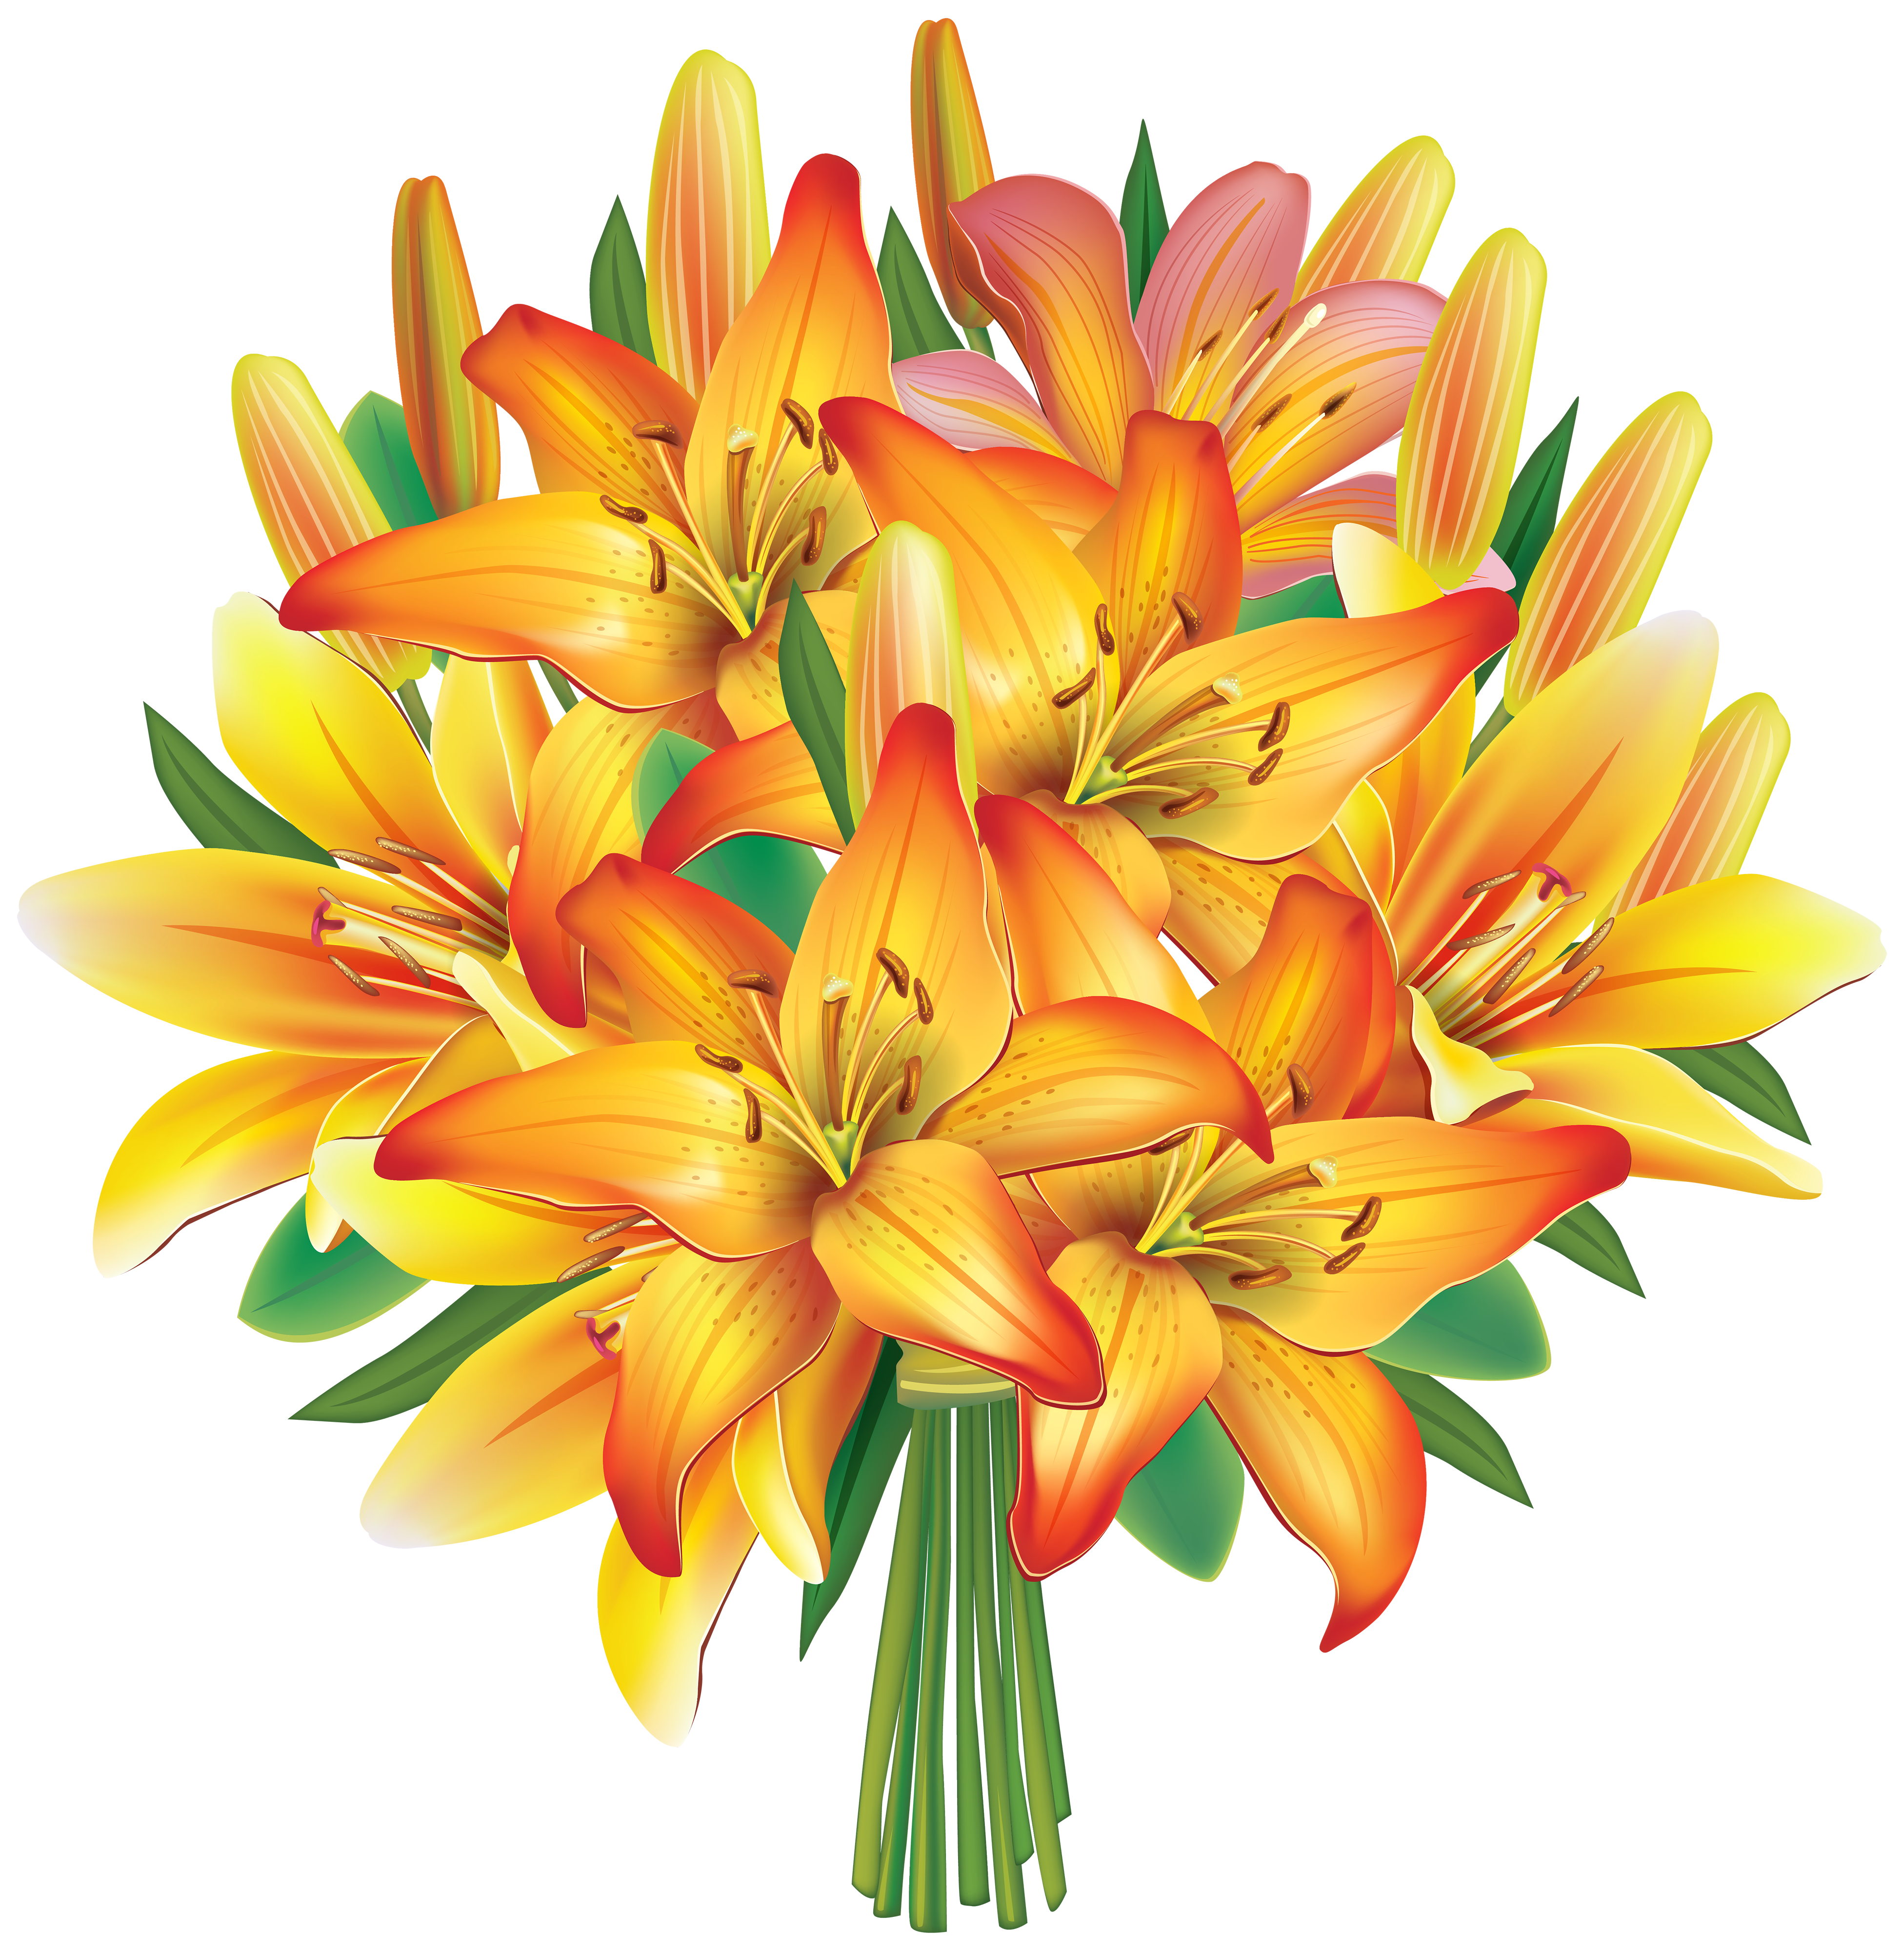 Flower bouquet png. Clipart at getdrawings com